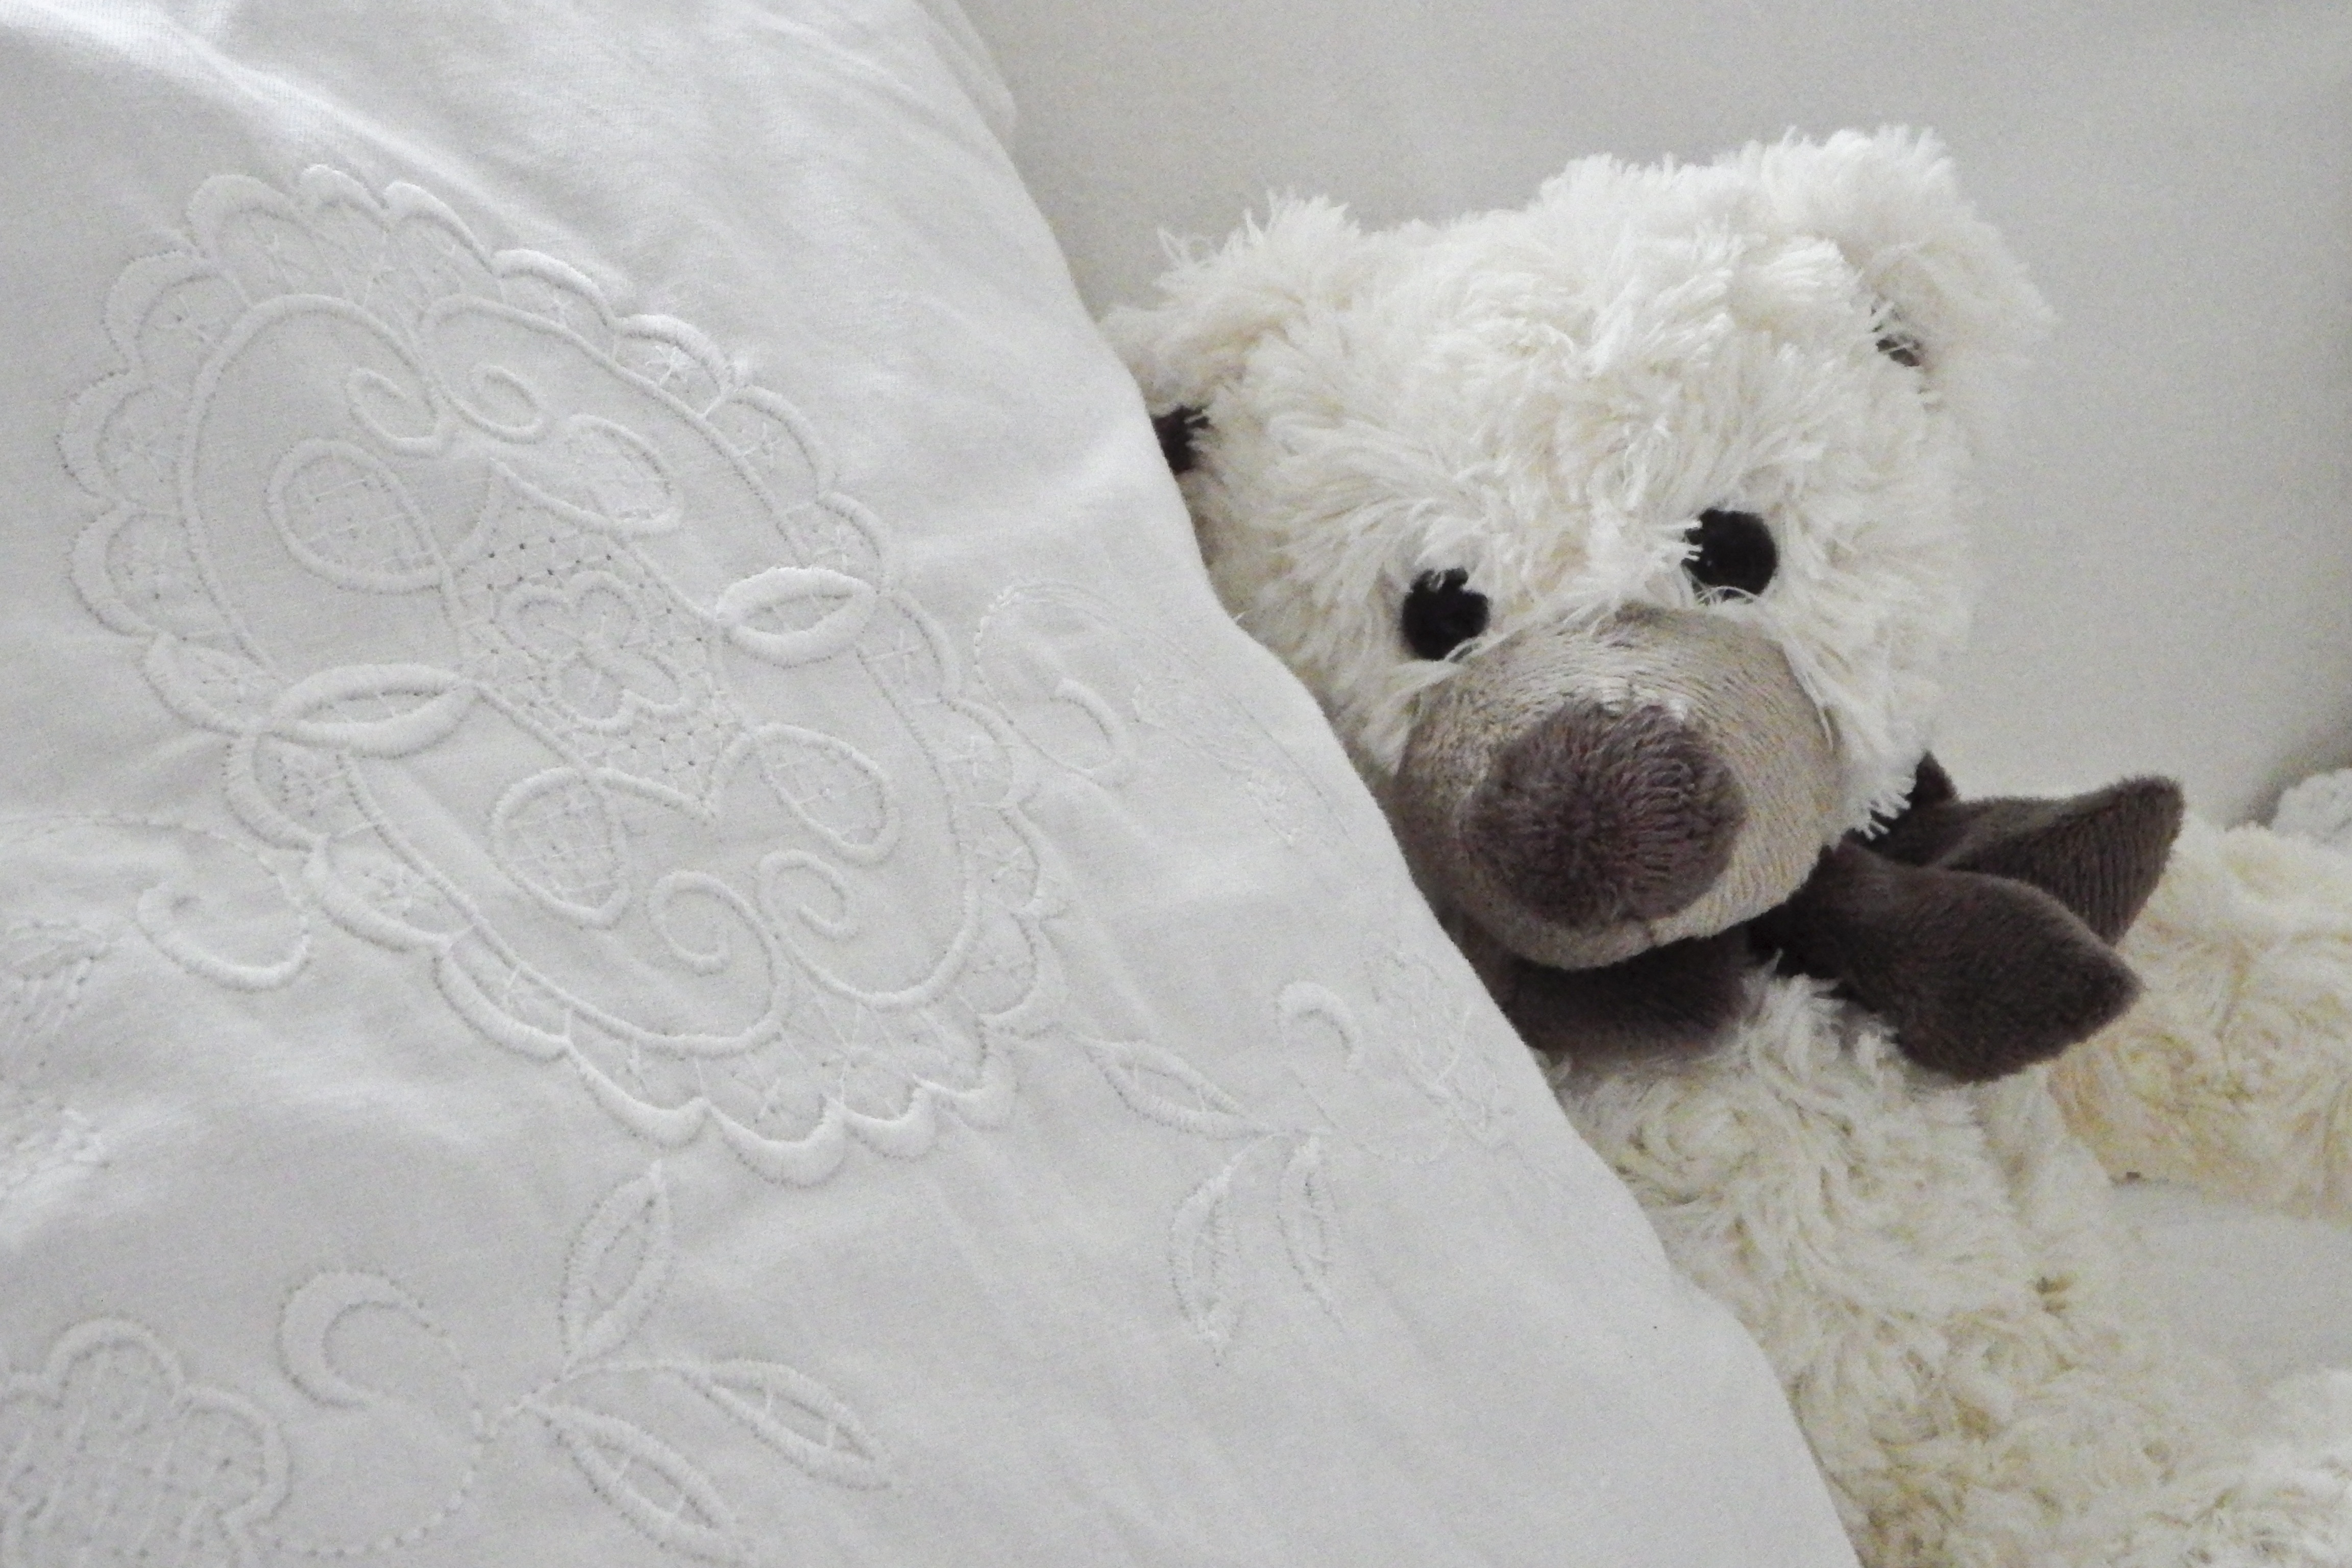 67558 download wallpaper teddy bear, patterns, miscellanea, miscellaneous, toy, pillow screensavers and pictures for free